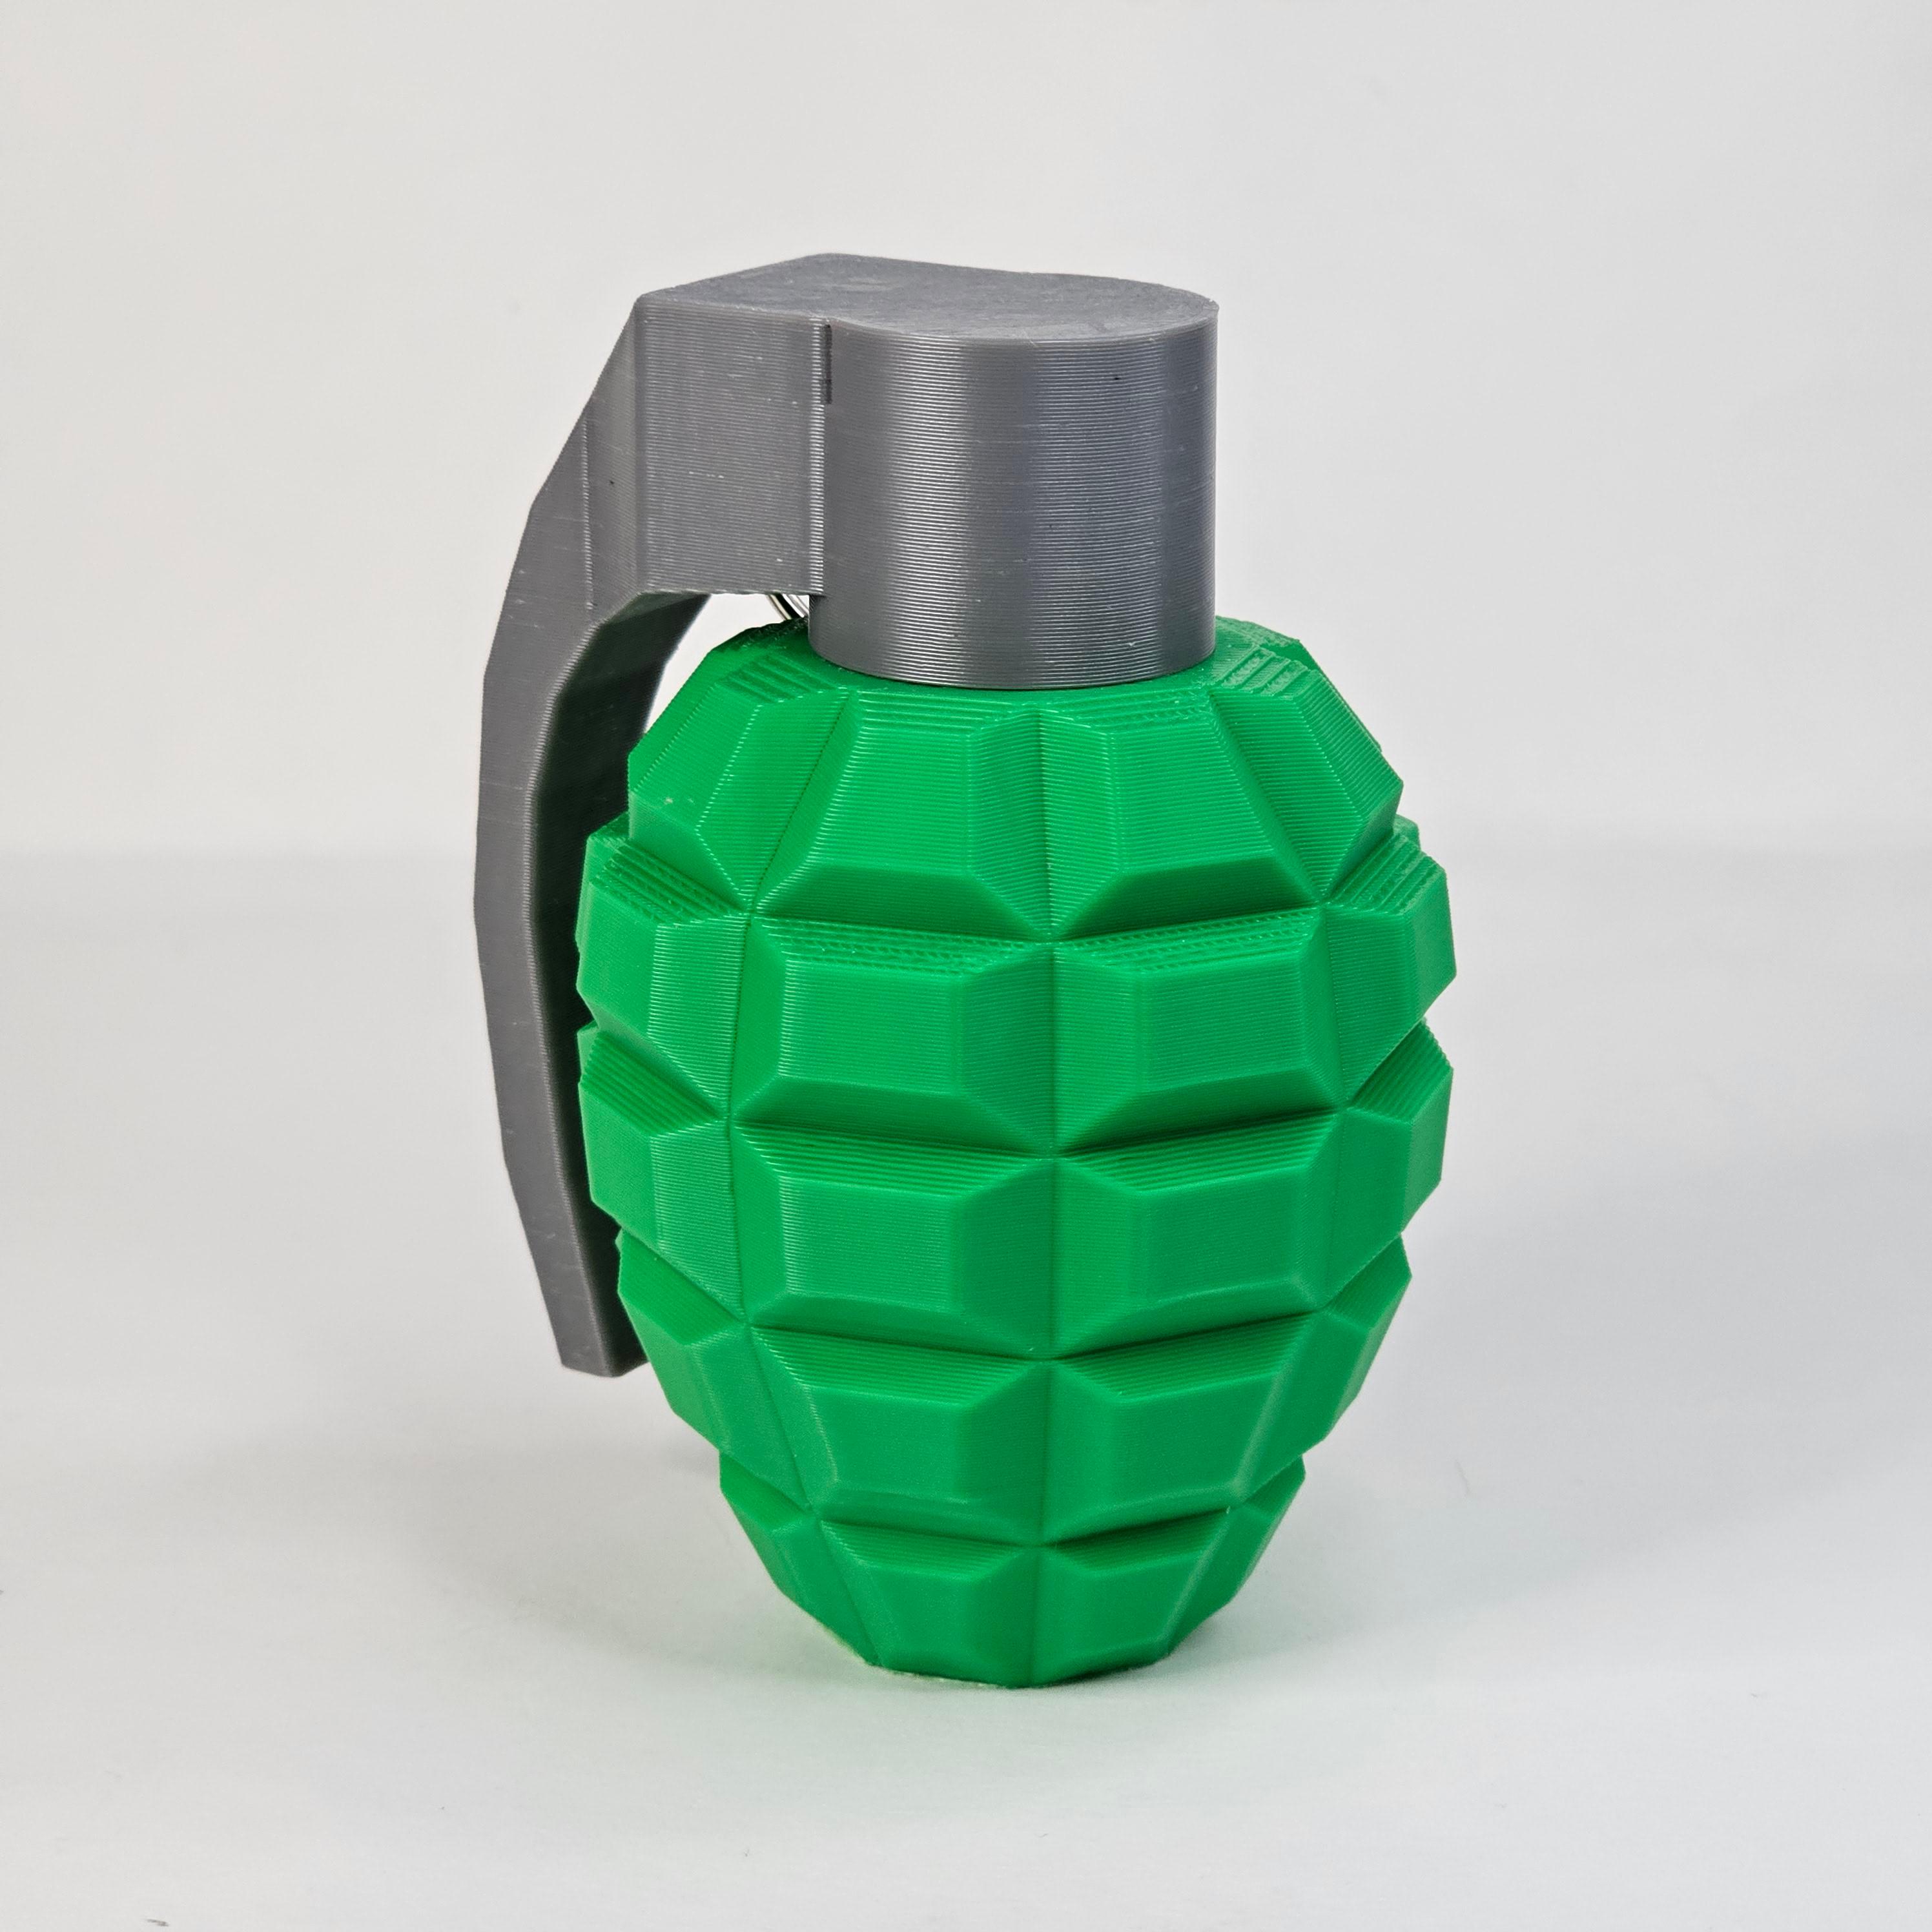 GRENADE PROP - NO SUPPORTS - EASY-TO-USE 3d model